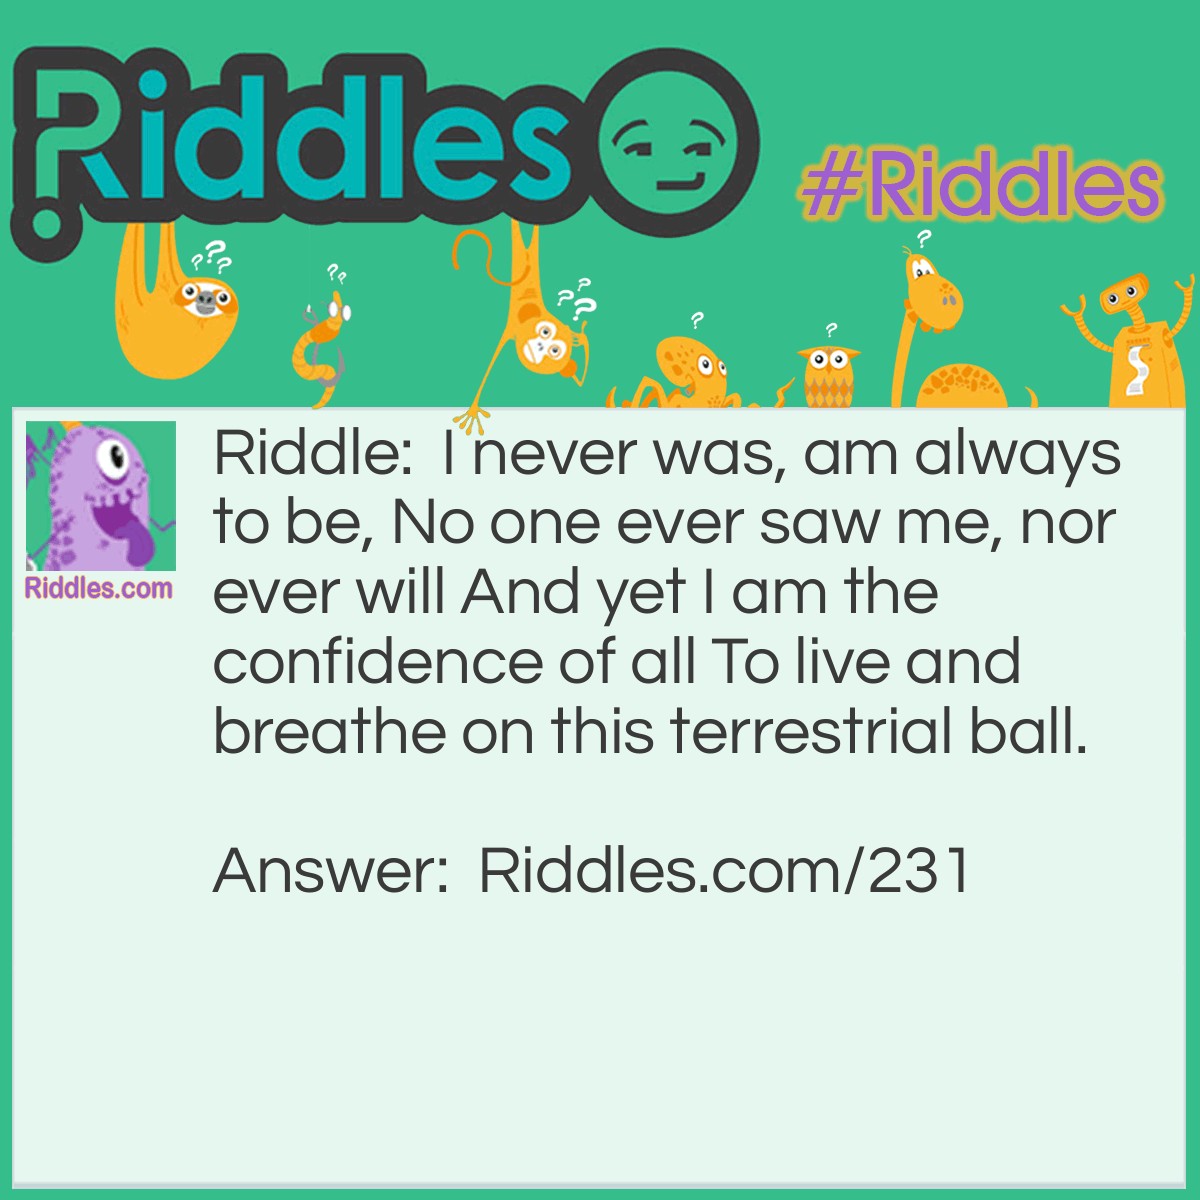 Riddle: I never was, am always to be, No one ever saw me, nor ever will And yet I am the confidence of all To live and breathe on this terrestrial ball. What am I? Answer: I am tomorrow - your future.